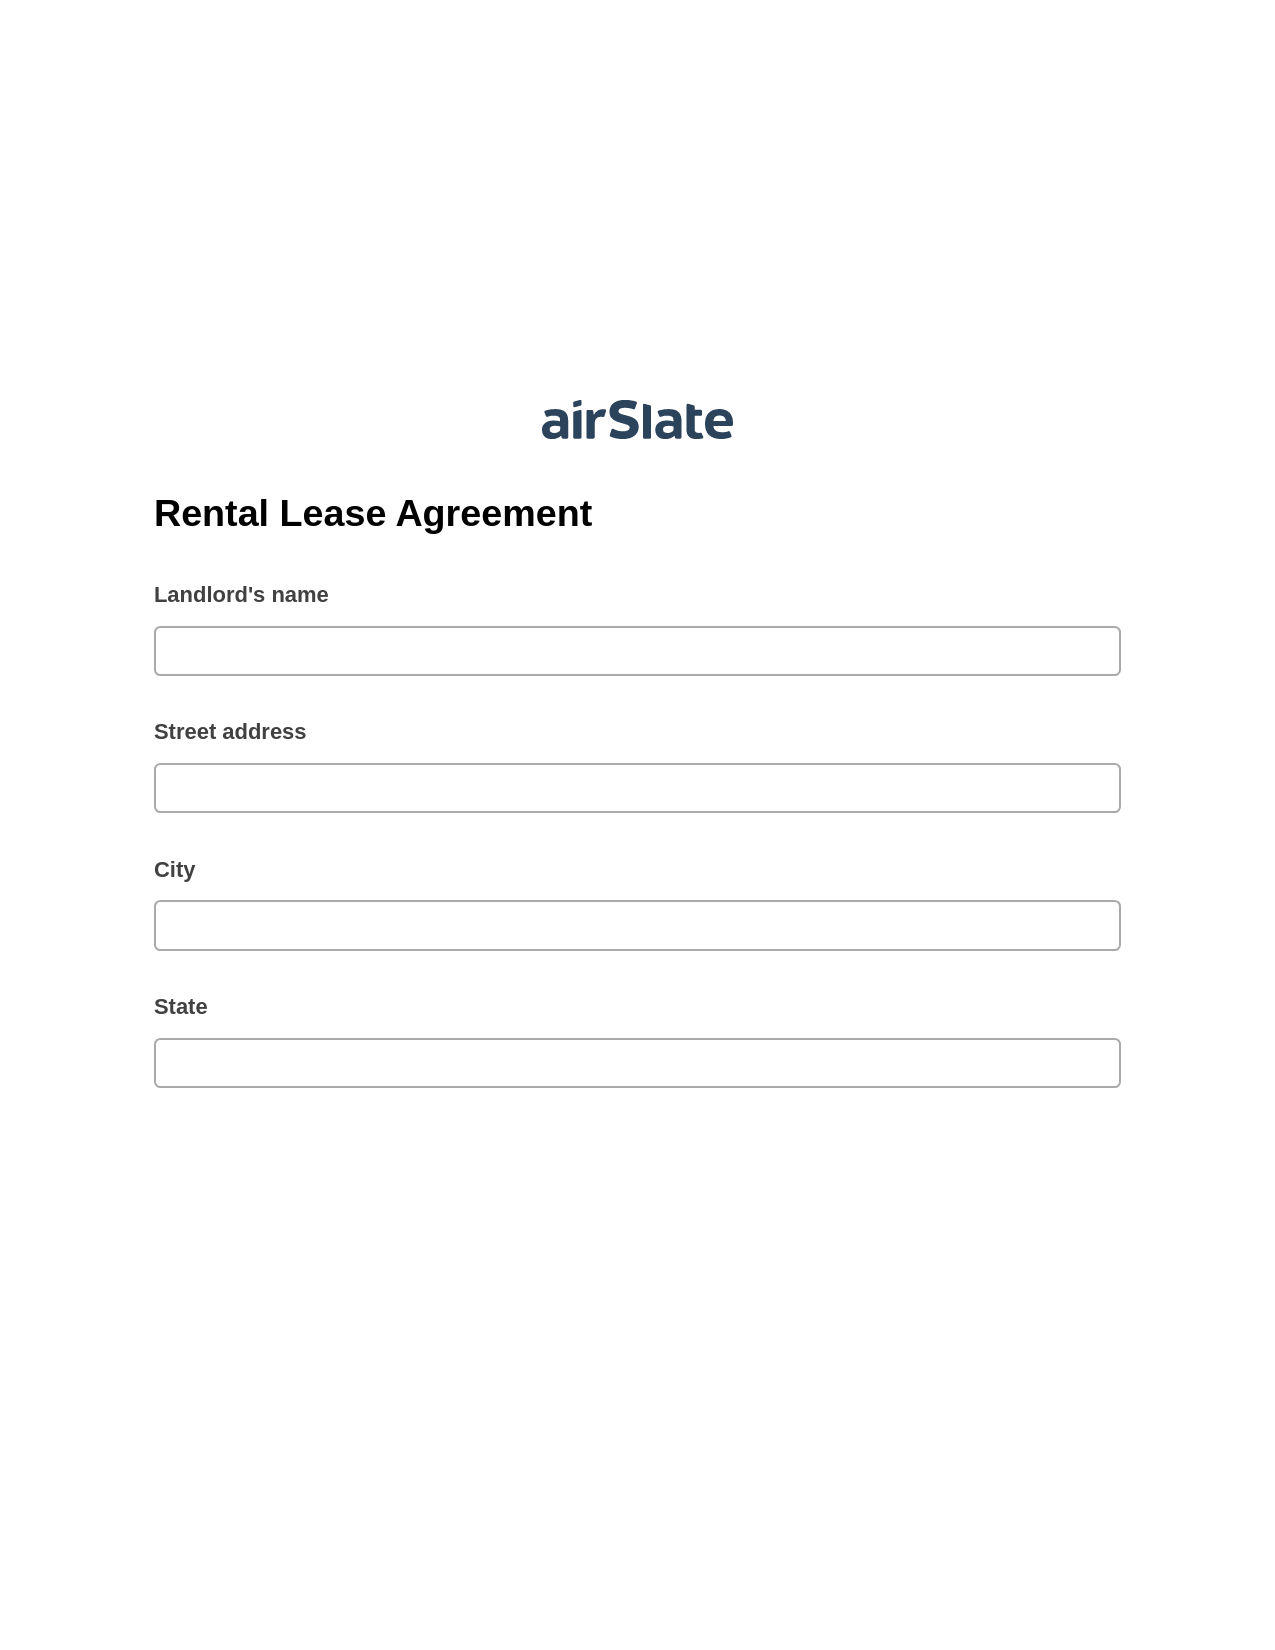 Rental Lease Agreement Pre-fill Slate from MS Dynamics 365 Records Bot, Assign Roles to Recipients Bot, Webhook Postfinish Bot